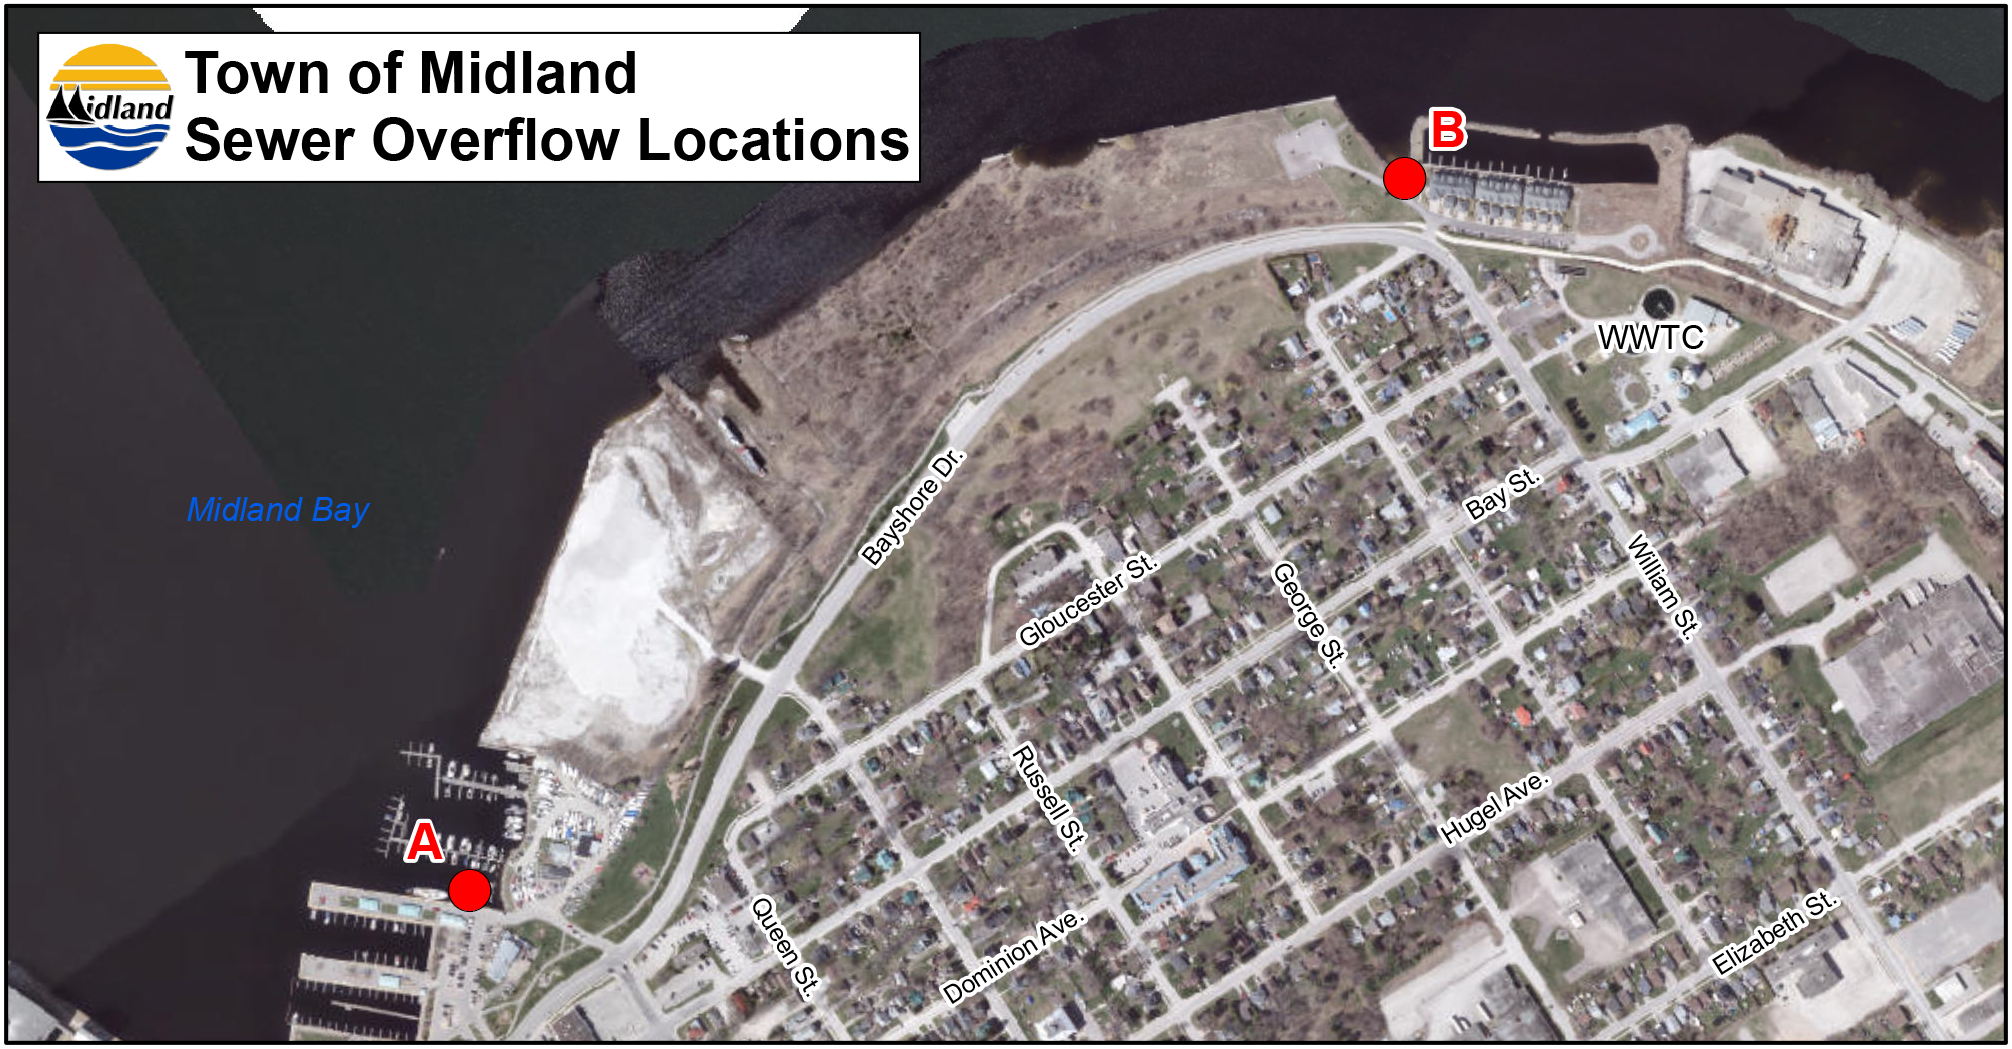 Town of Midland Sewer Overflow Locations 